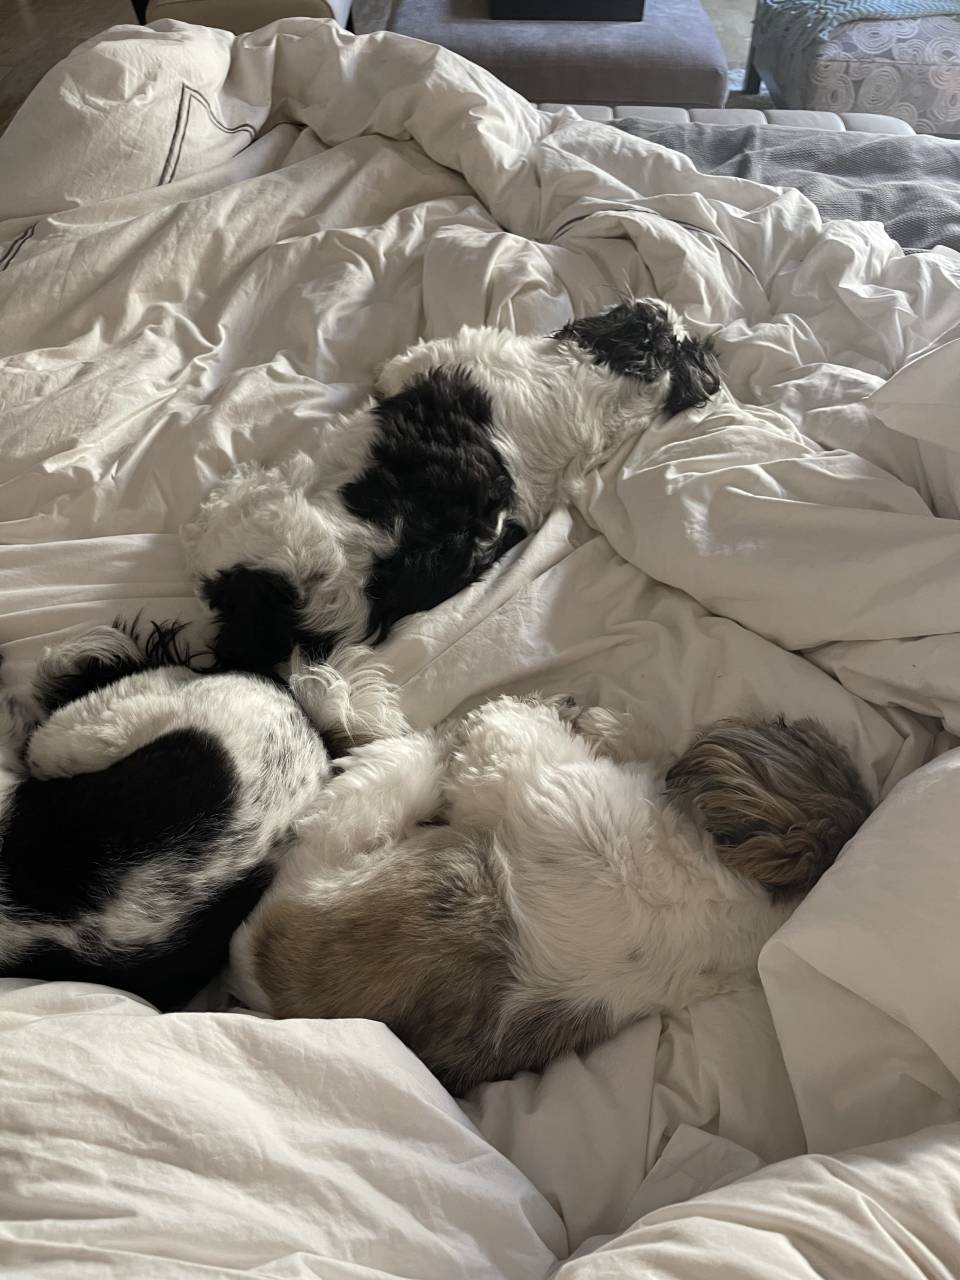 Shih Tzu named Spitz dogs. Oreo and Snoopy and Reece